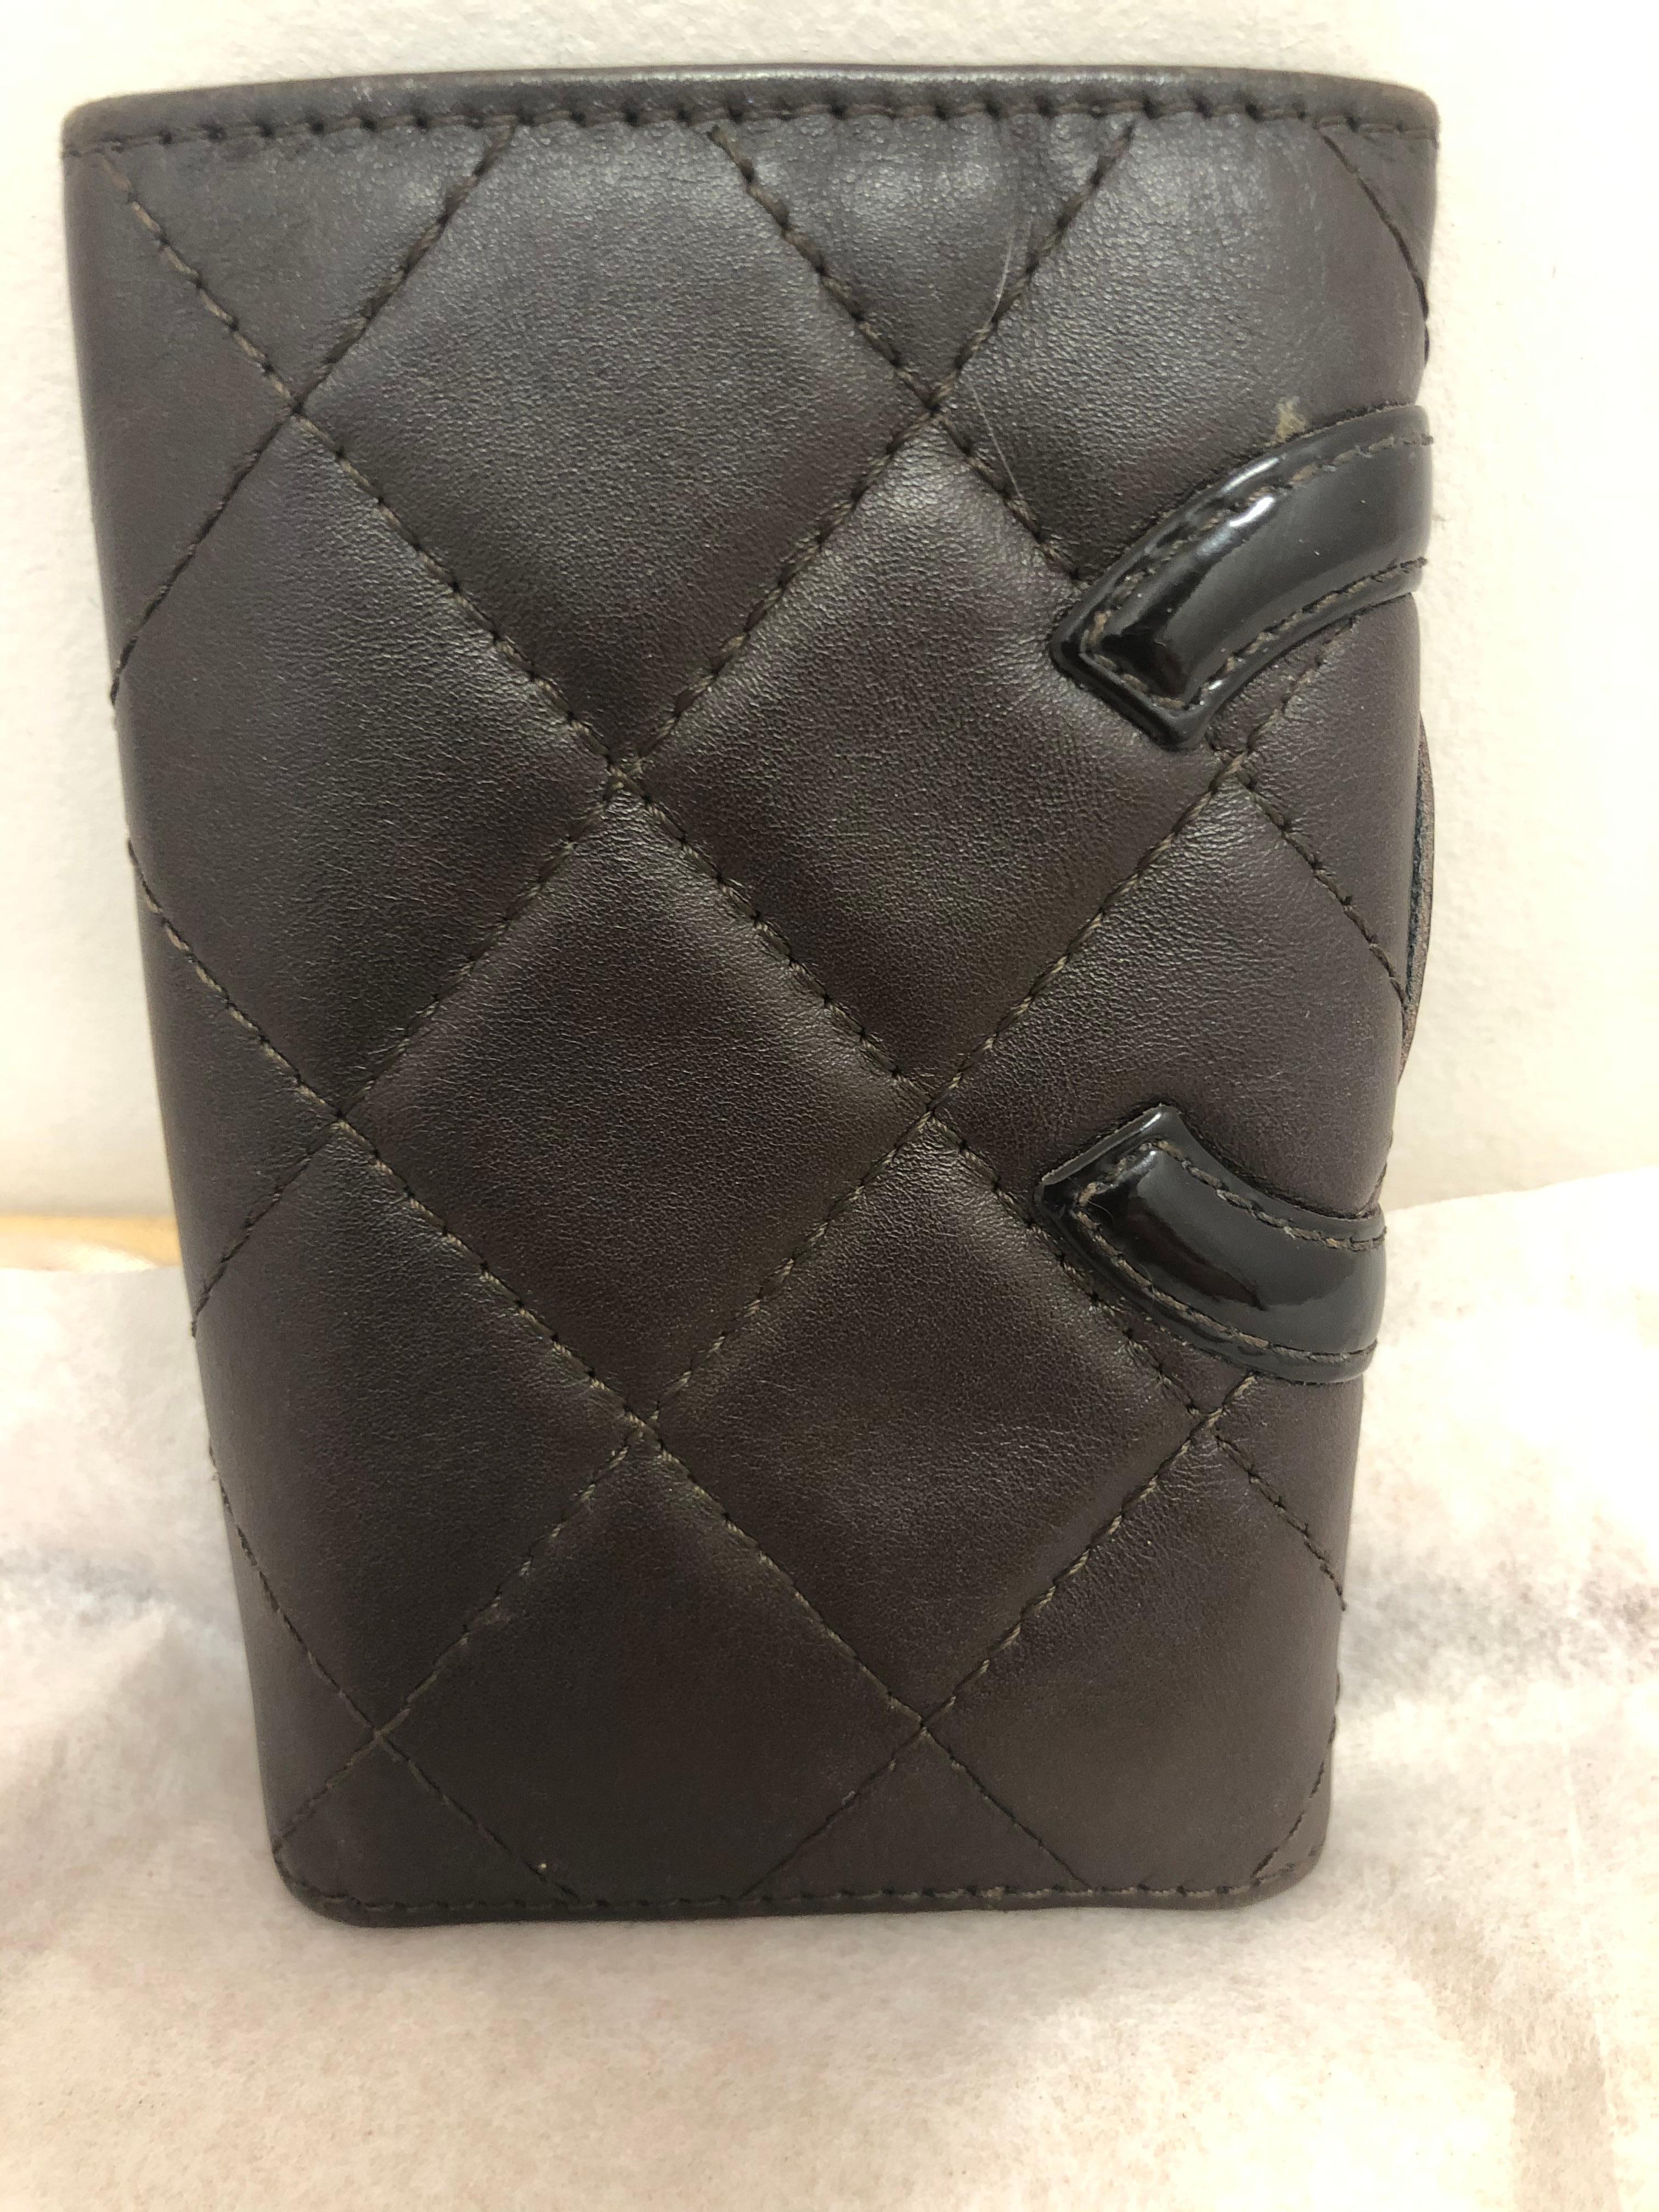 Chocolate brown w/black CC, this Chanel Cambon key holder is lined in orange and has a capacity for 6 keys; a slit pocket for credit cards, with one small slit for folded bills.

Made in Italy